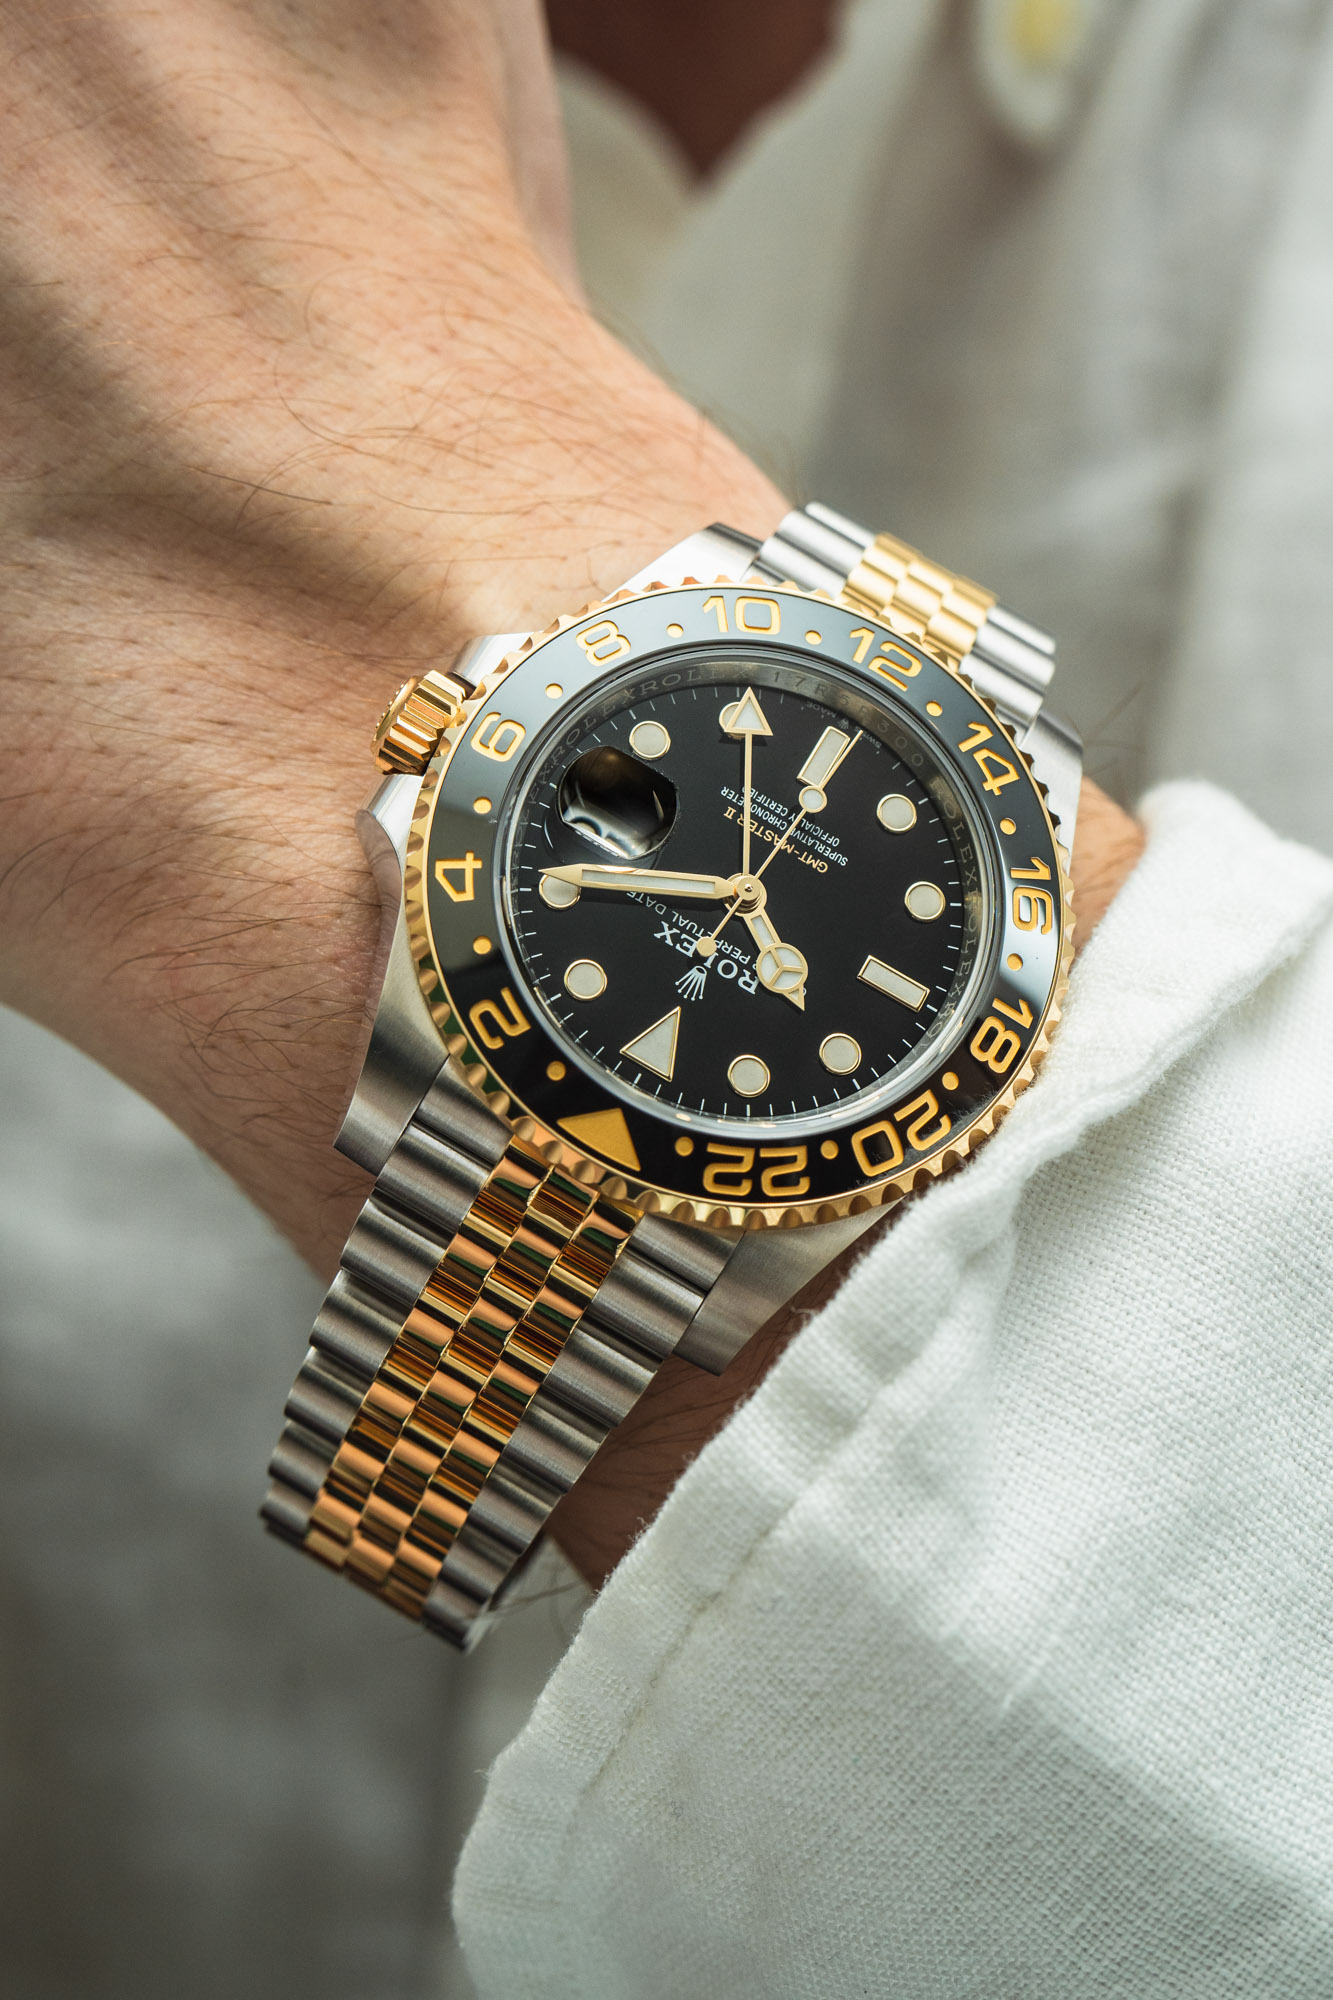 Rolex GMT-Master II Watch, An Era Of Two-Tone And Yellow Gold